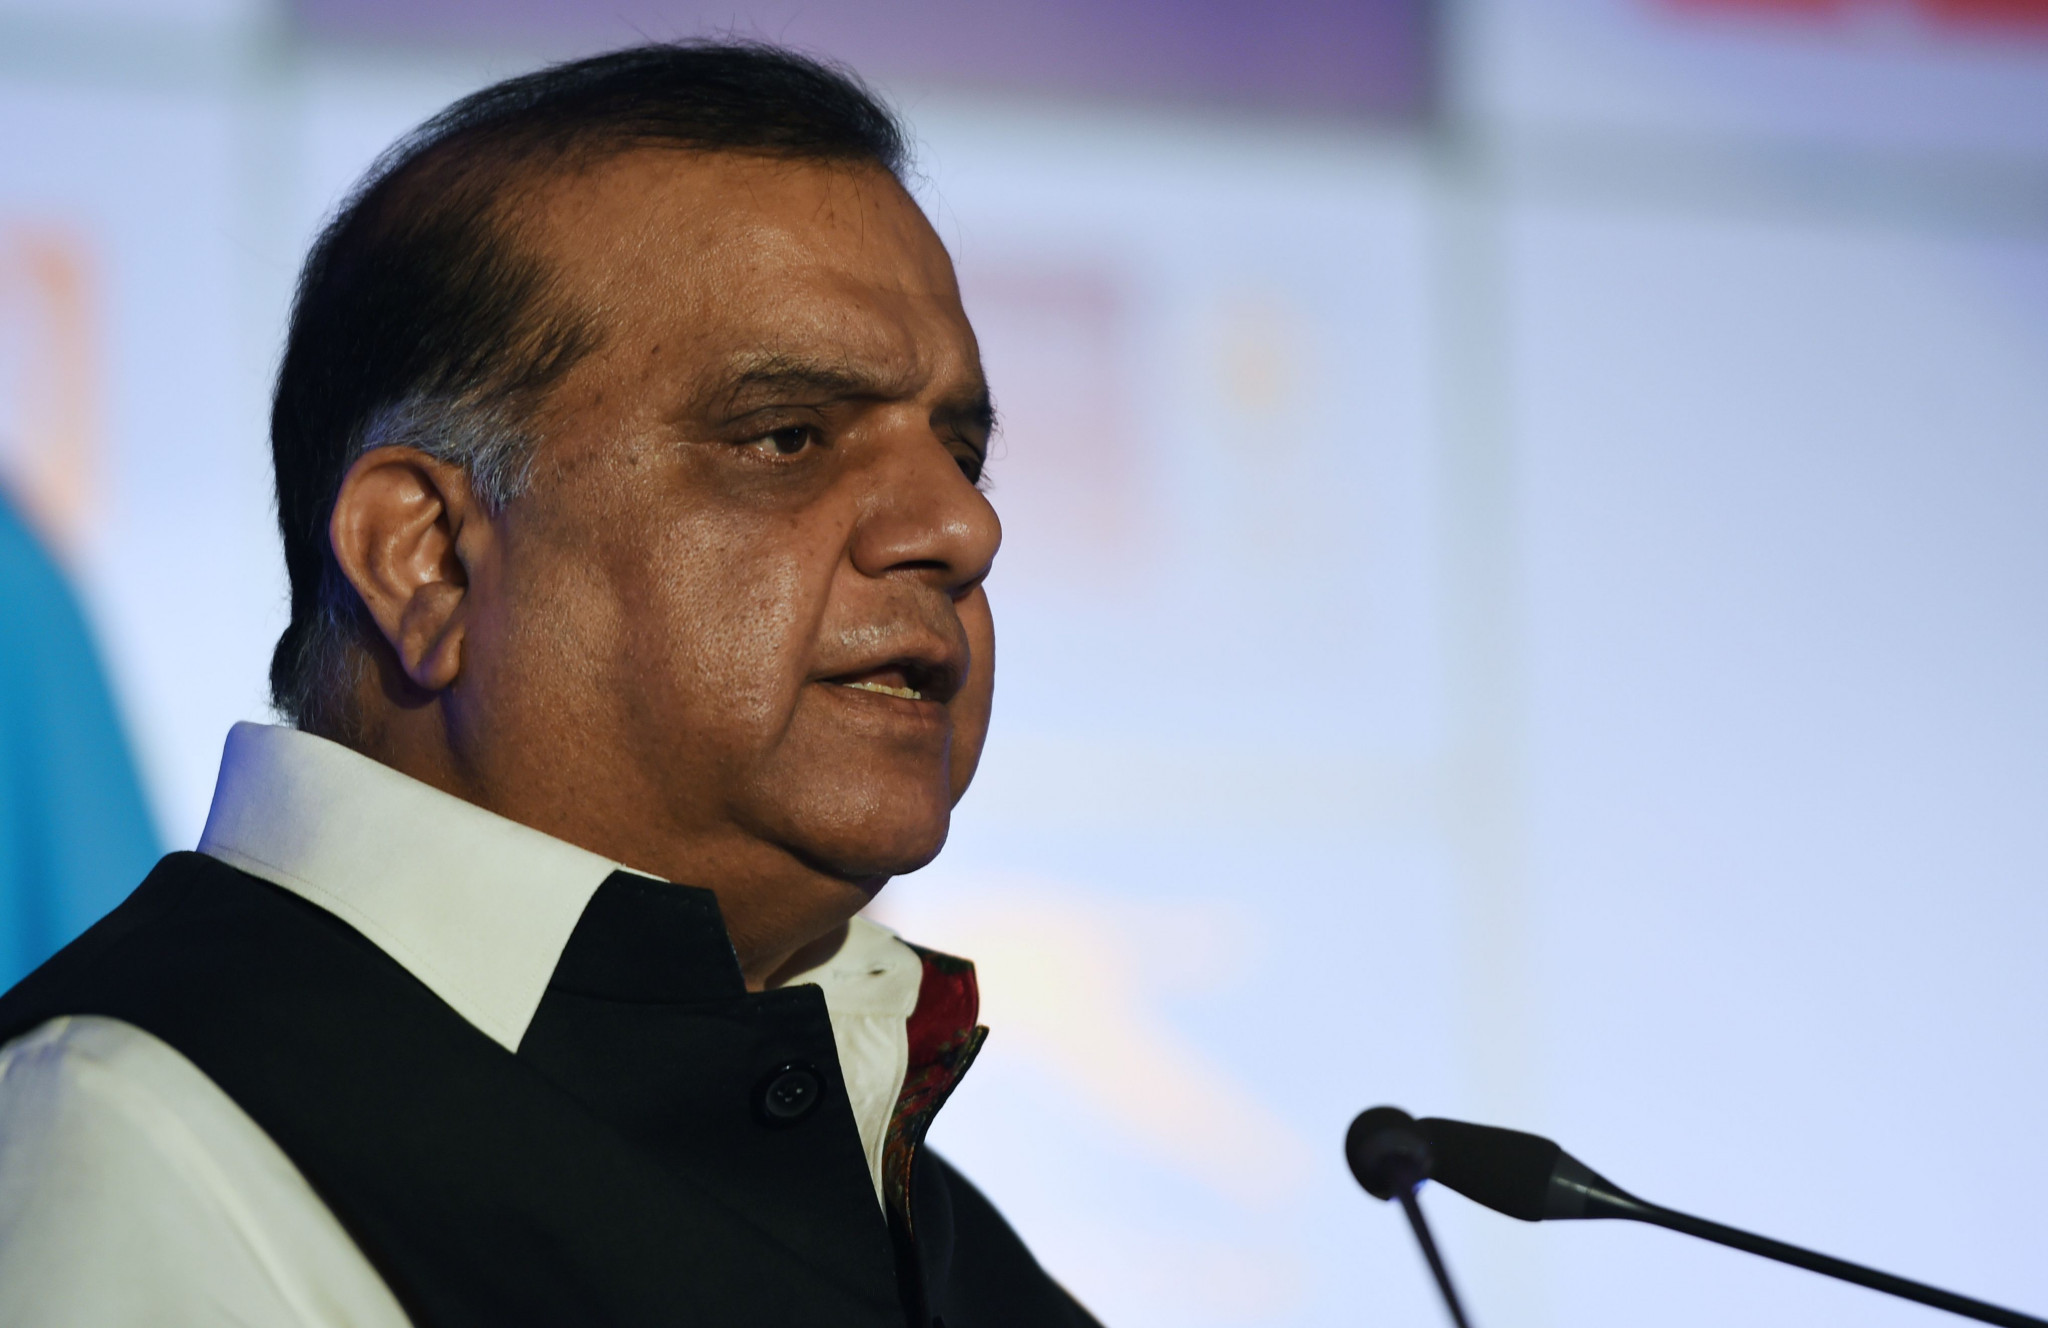 IOA President Narinder Batra has lent his support to the move and is set to meet the country's Sports Minister to discuss a potential boycott over the omission of shooting from Birmingham 2022 ©Getty Images